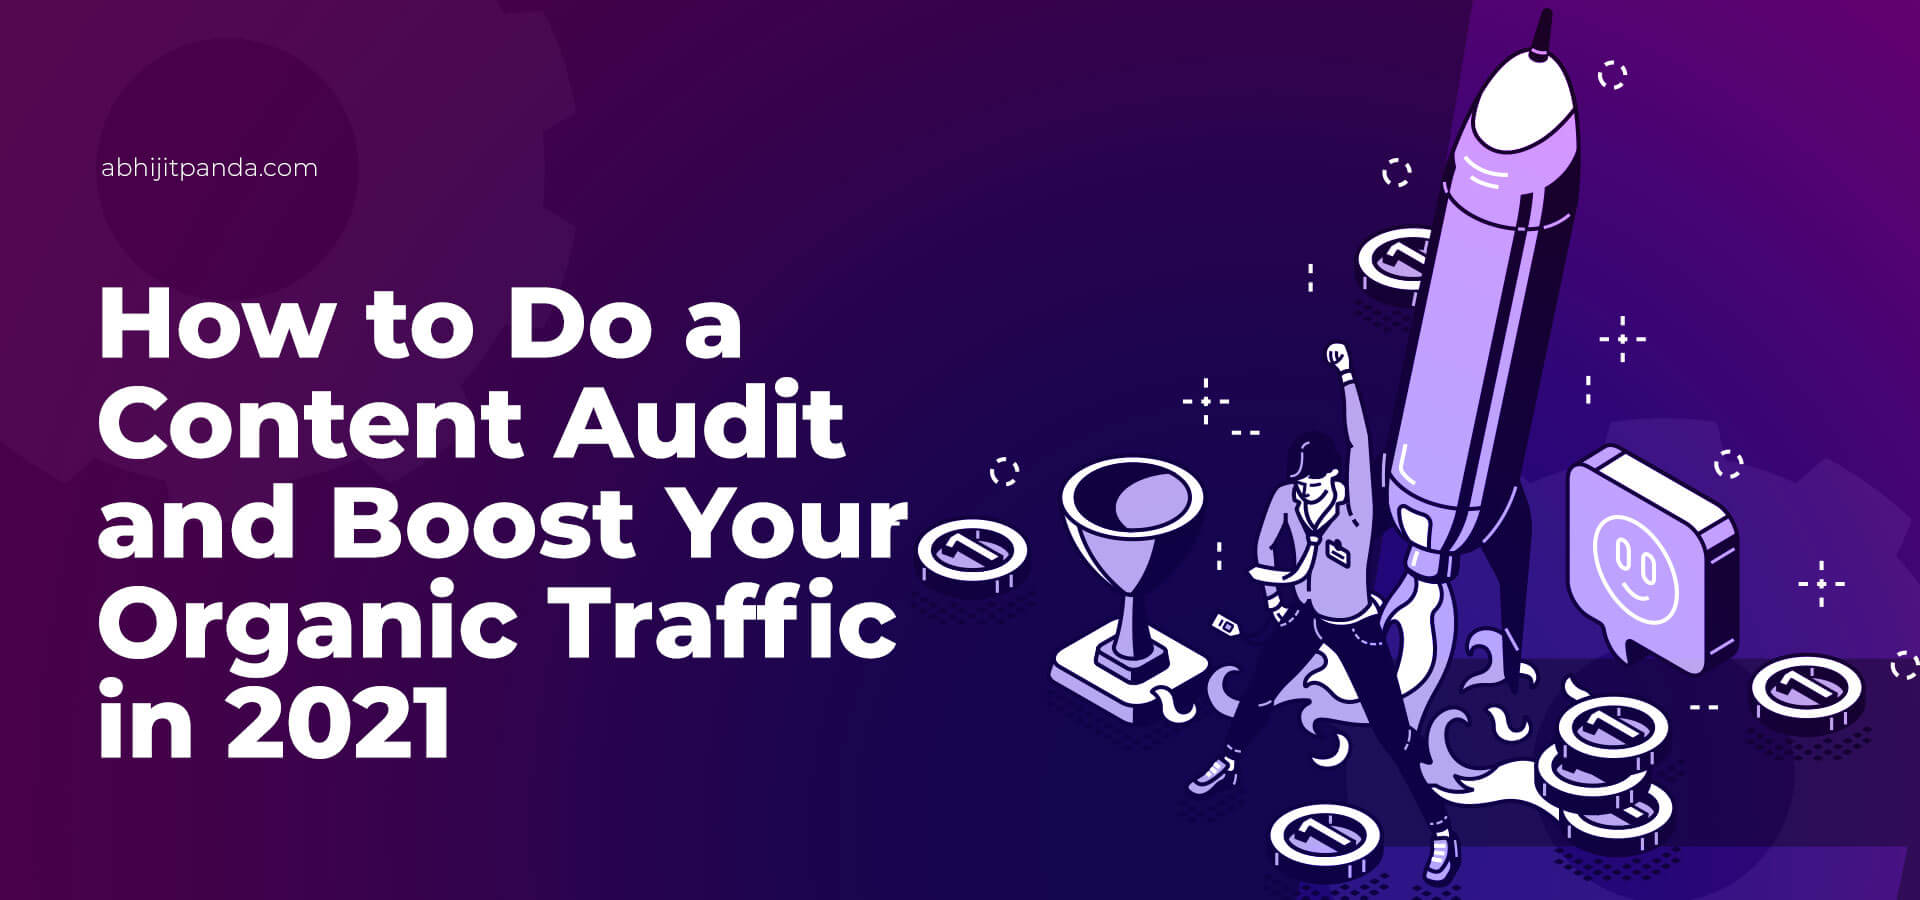 How to Do a Content Audit and Boost Your Organic Traffic